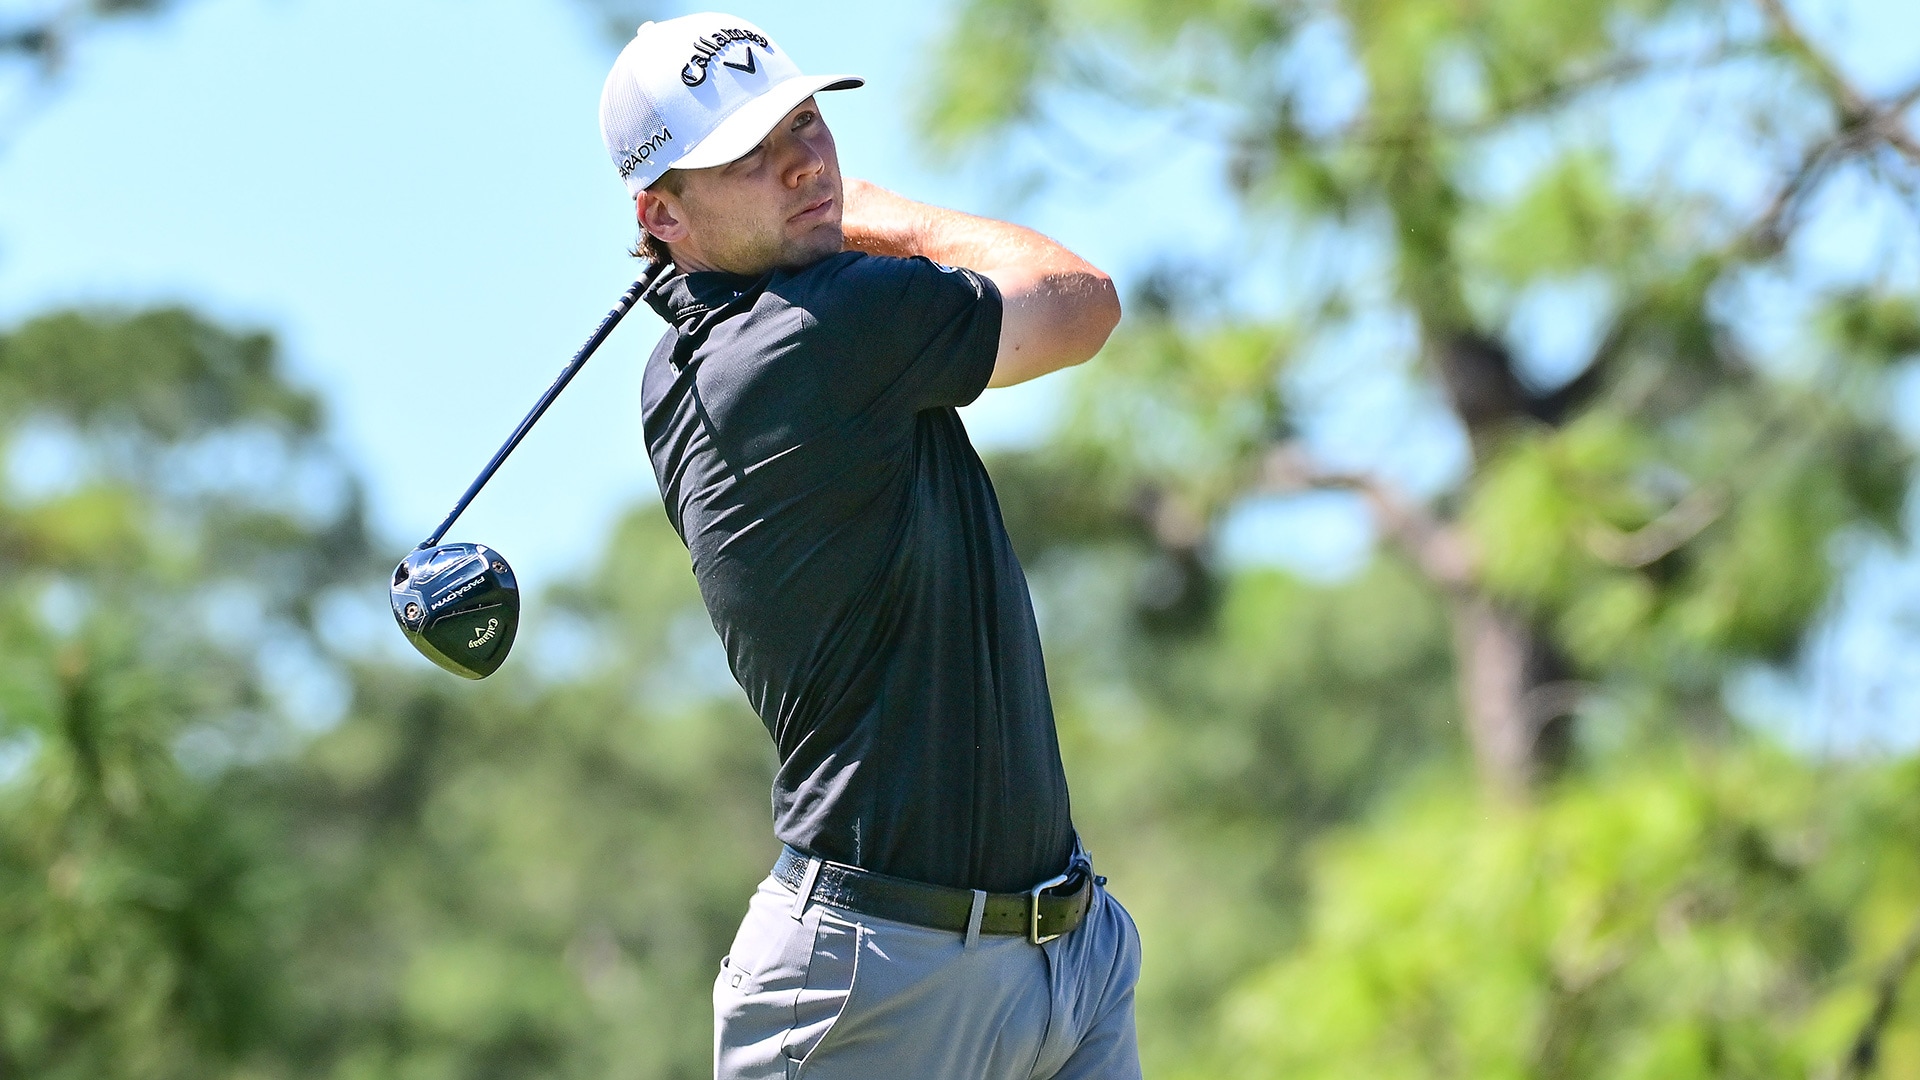 After driver found non-conforming earlier this year, Sam Burns finds one he loves at Valspar